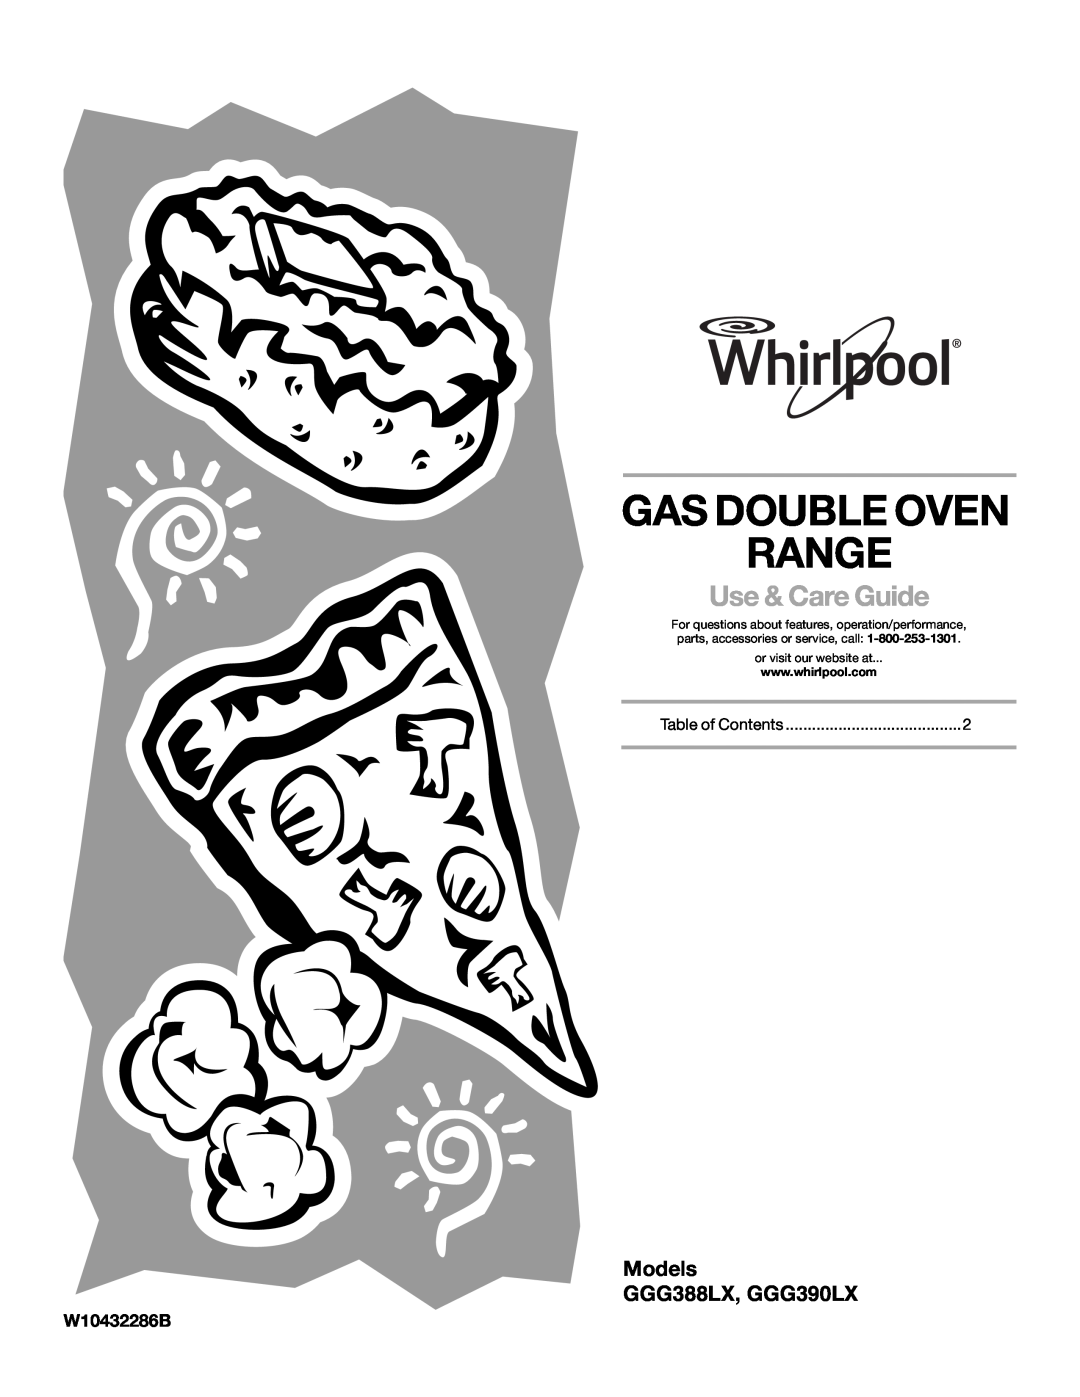 Whirlpool GGG388LX, GGG390LX manual Gas Double Oven Range, Use & Care Guide, Models, W10432286B, or visit our website at 